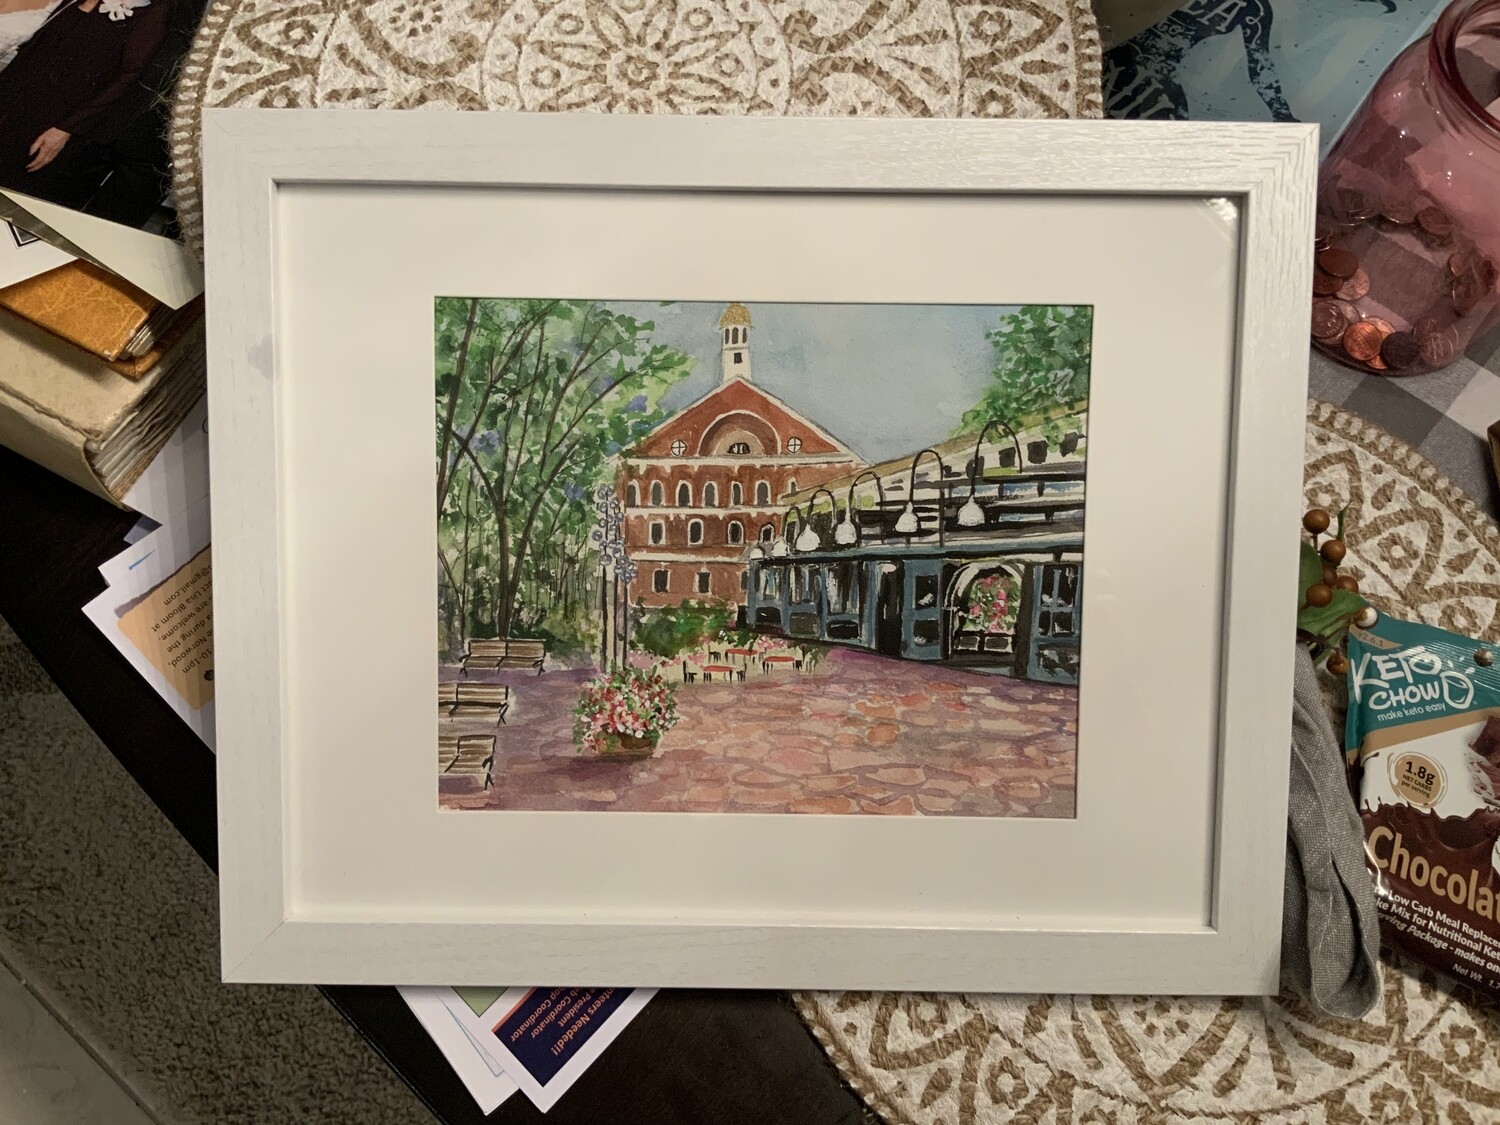 ”A day at Faneuil Hall Marketplace”
Boston, Mass. original watercolor painting